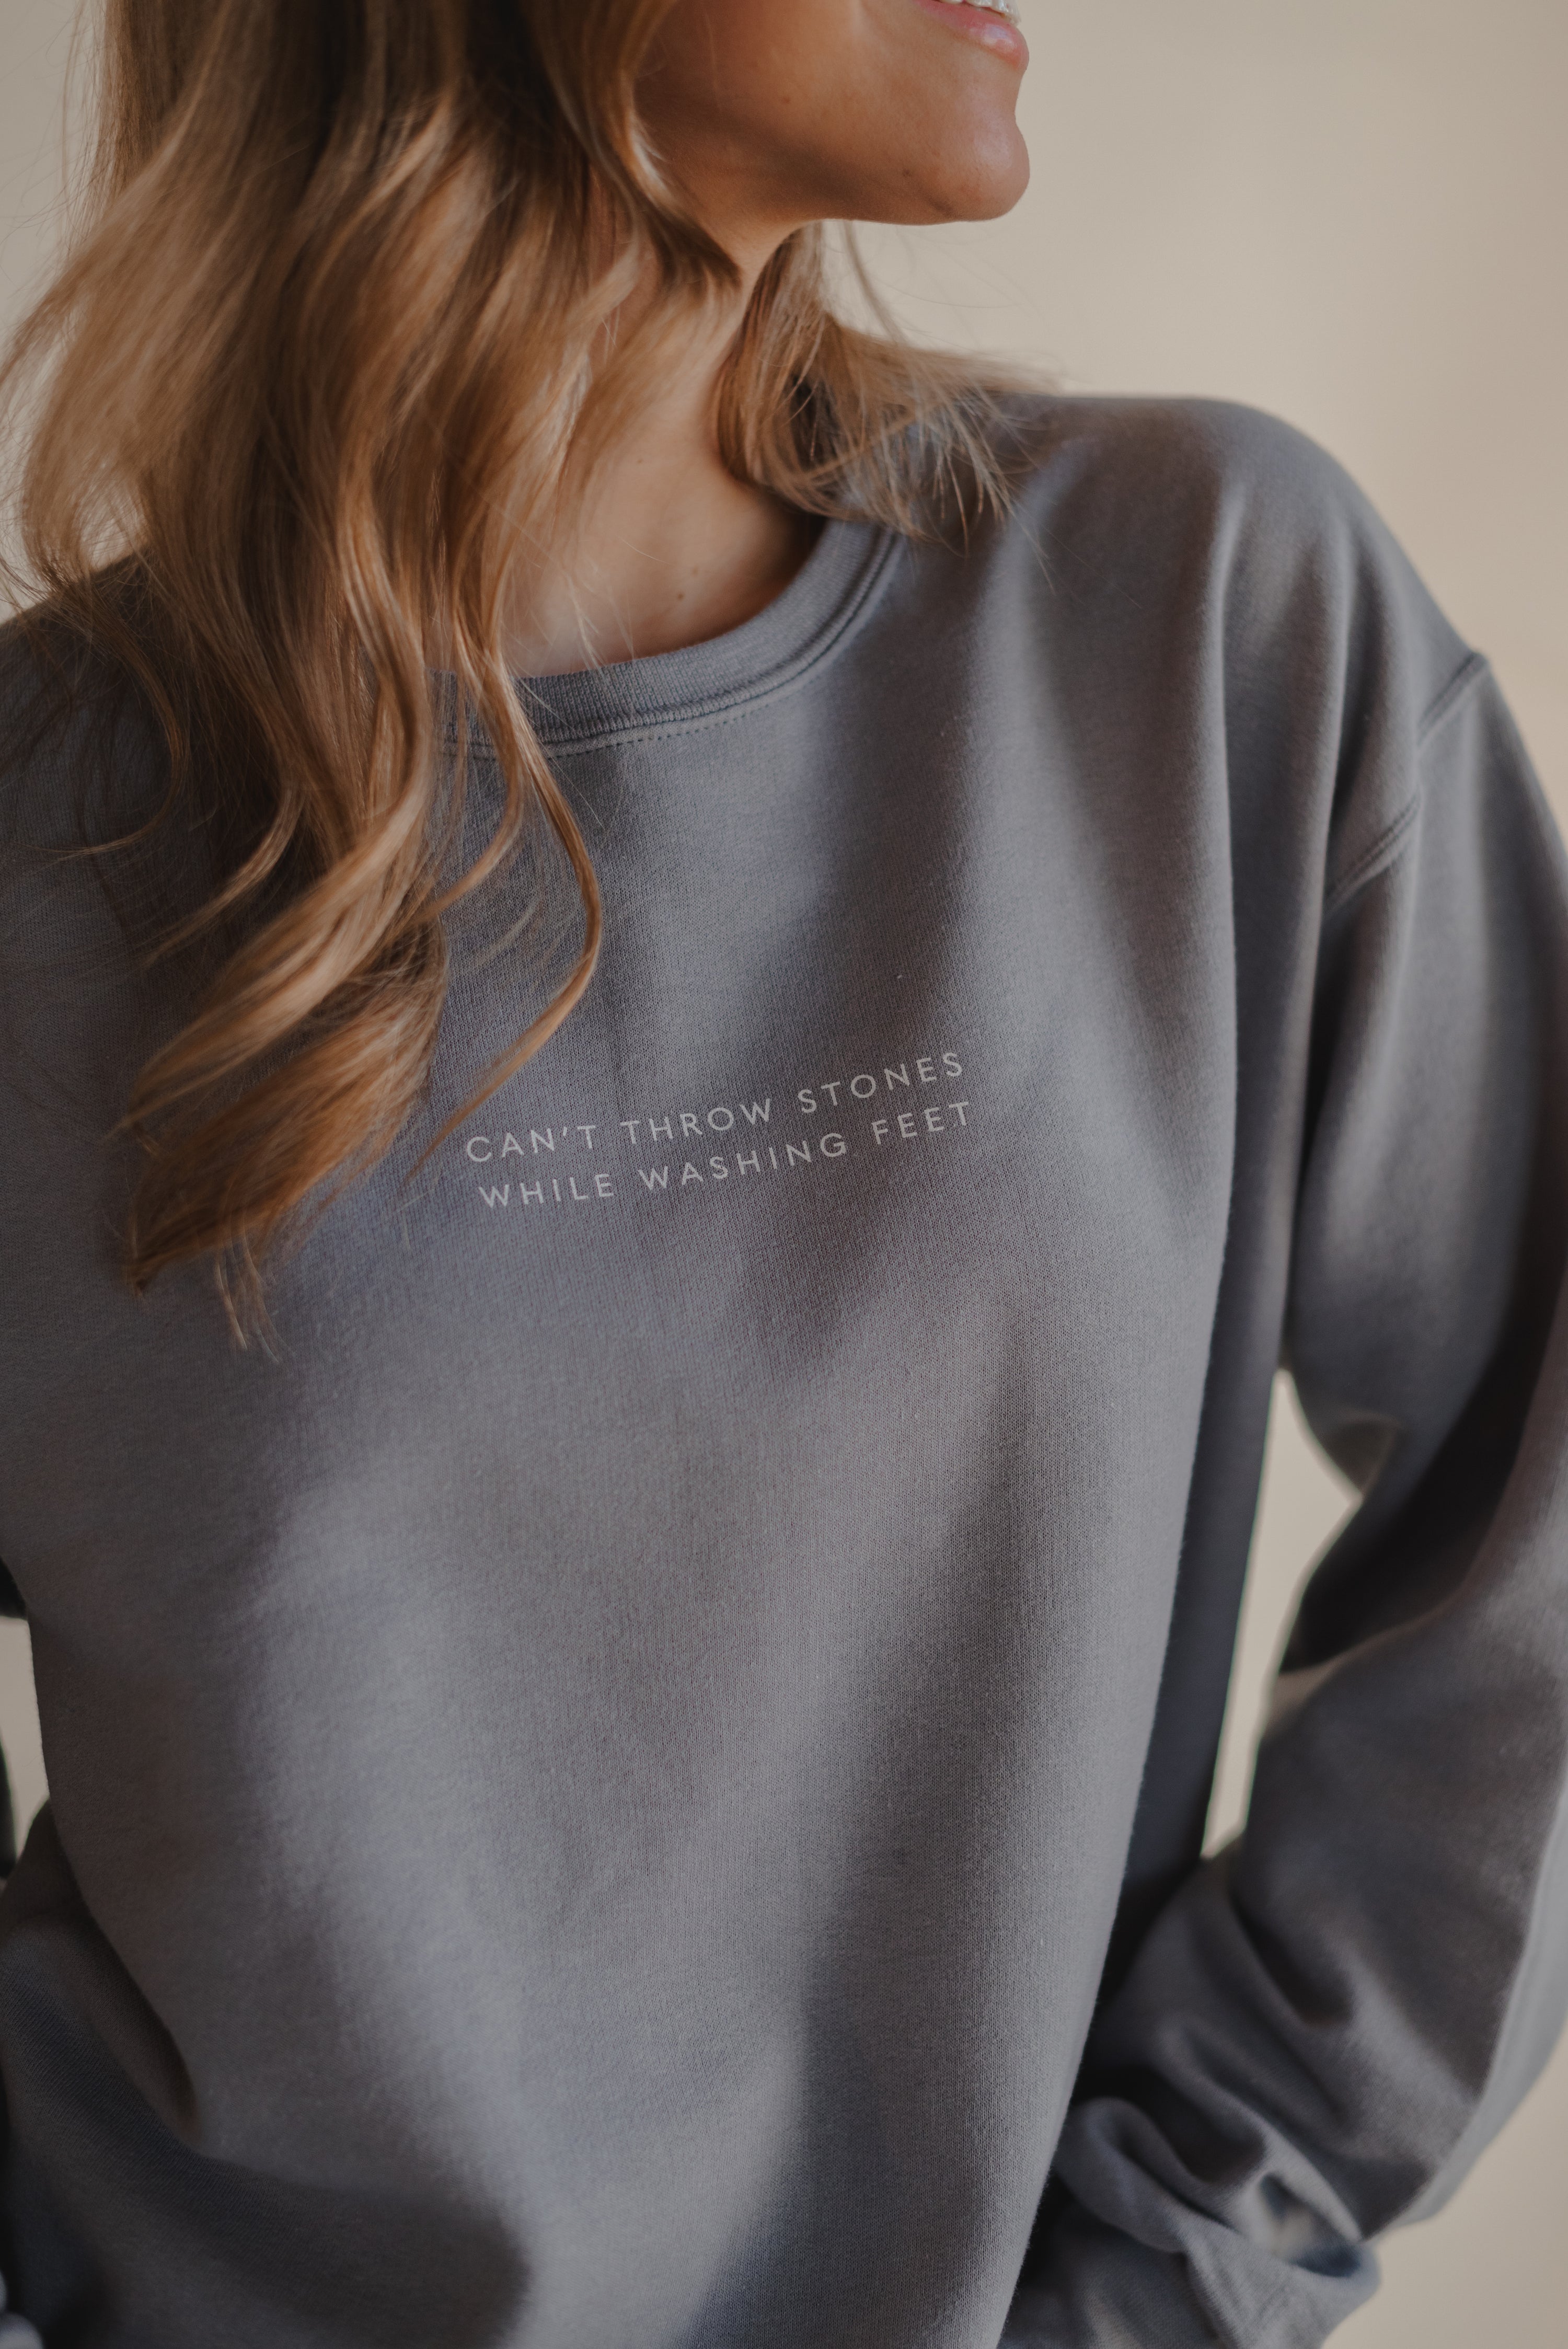 Can't Throw Stones Pullover- Stone Grey